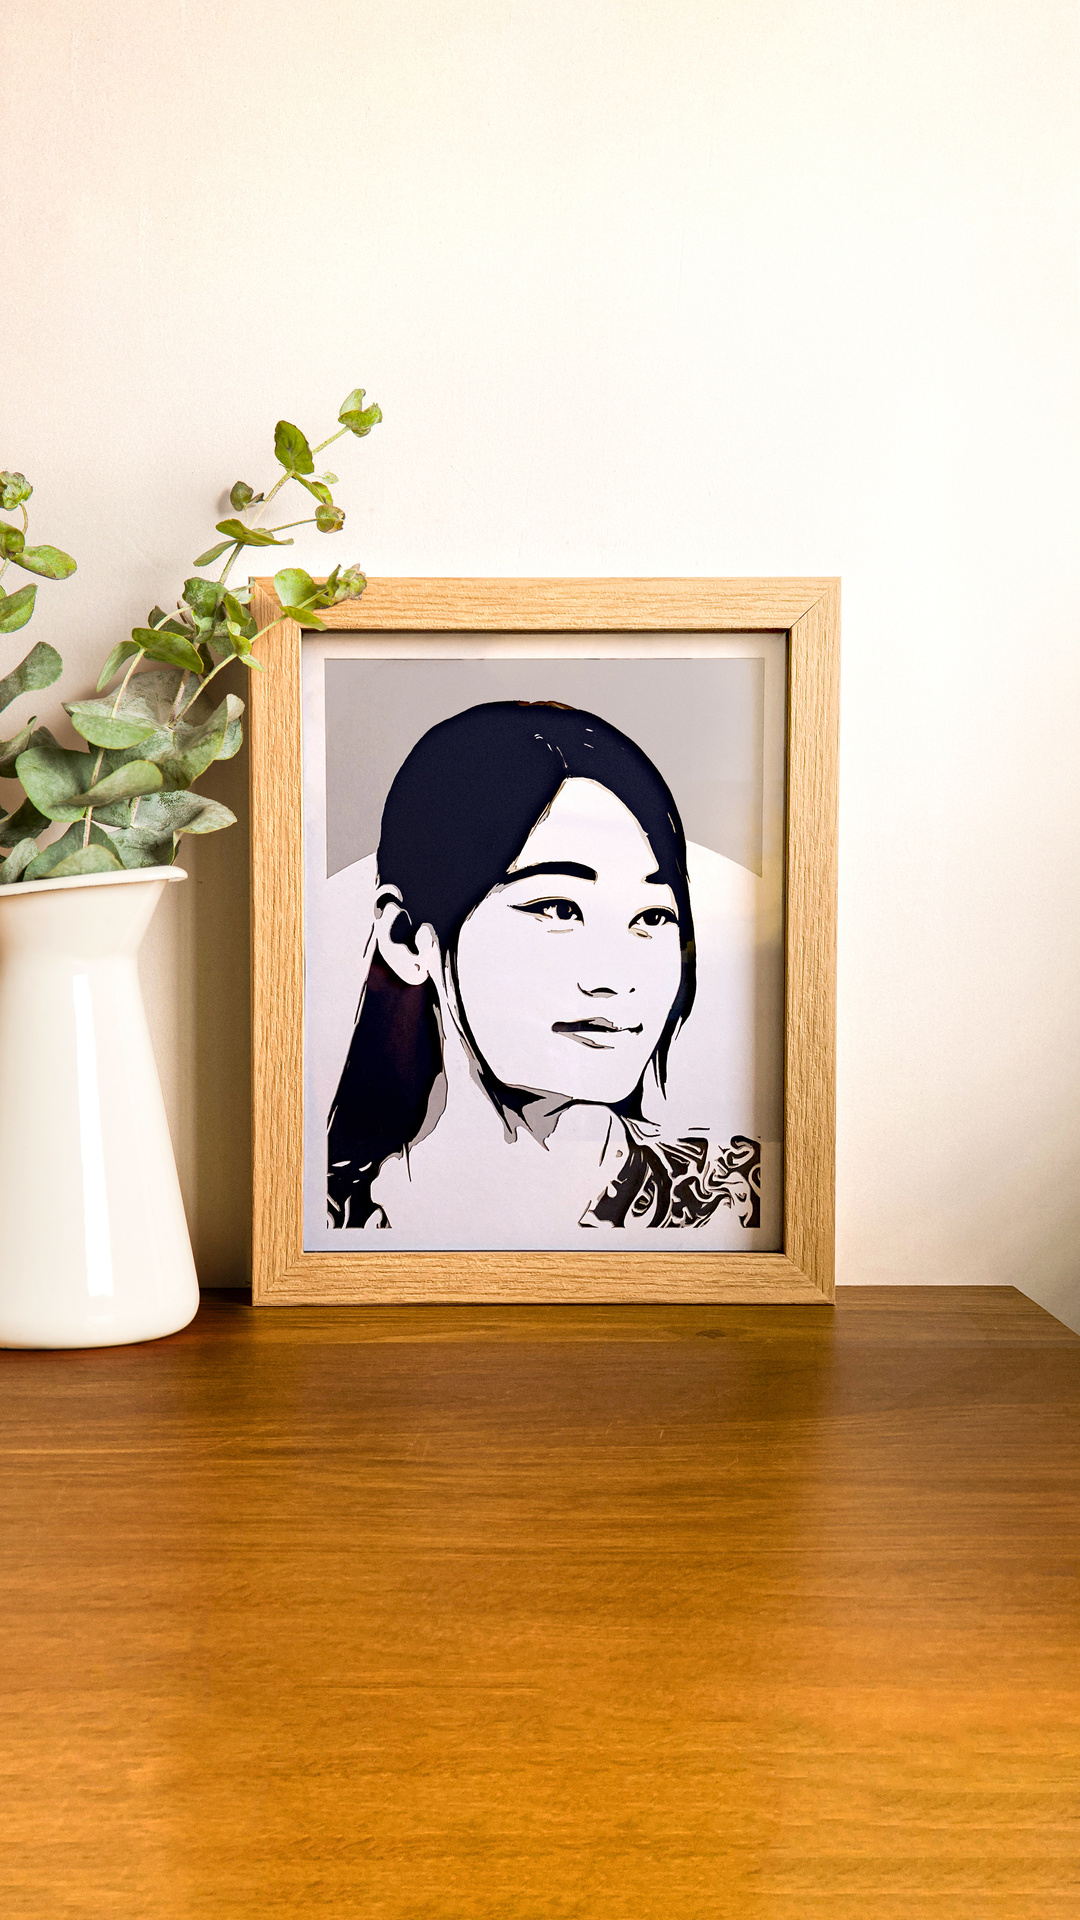 A perfect customized gift, a Paper Cutting Portrait for your loved ones.